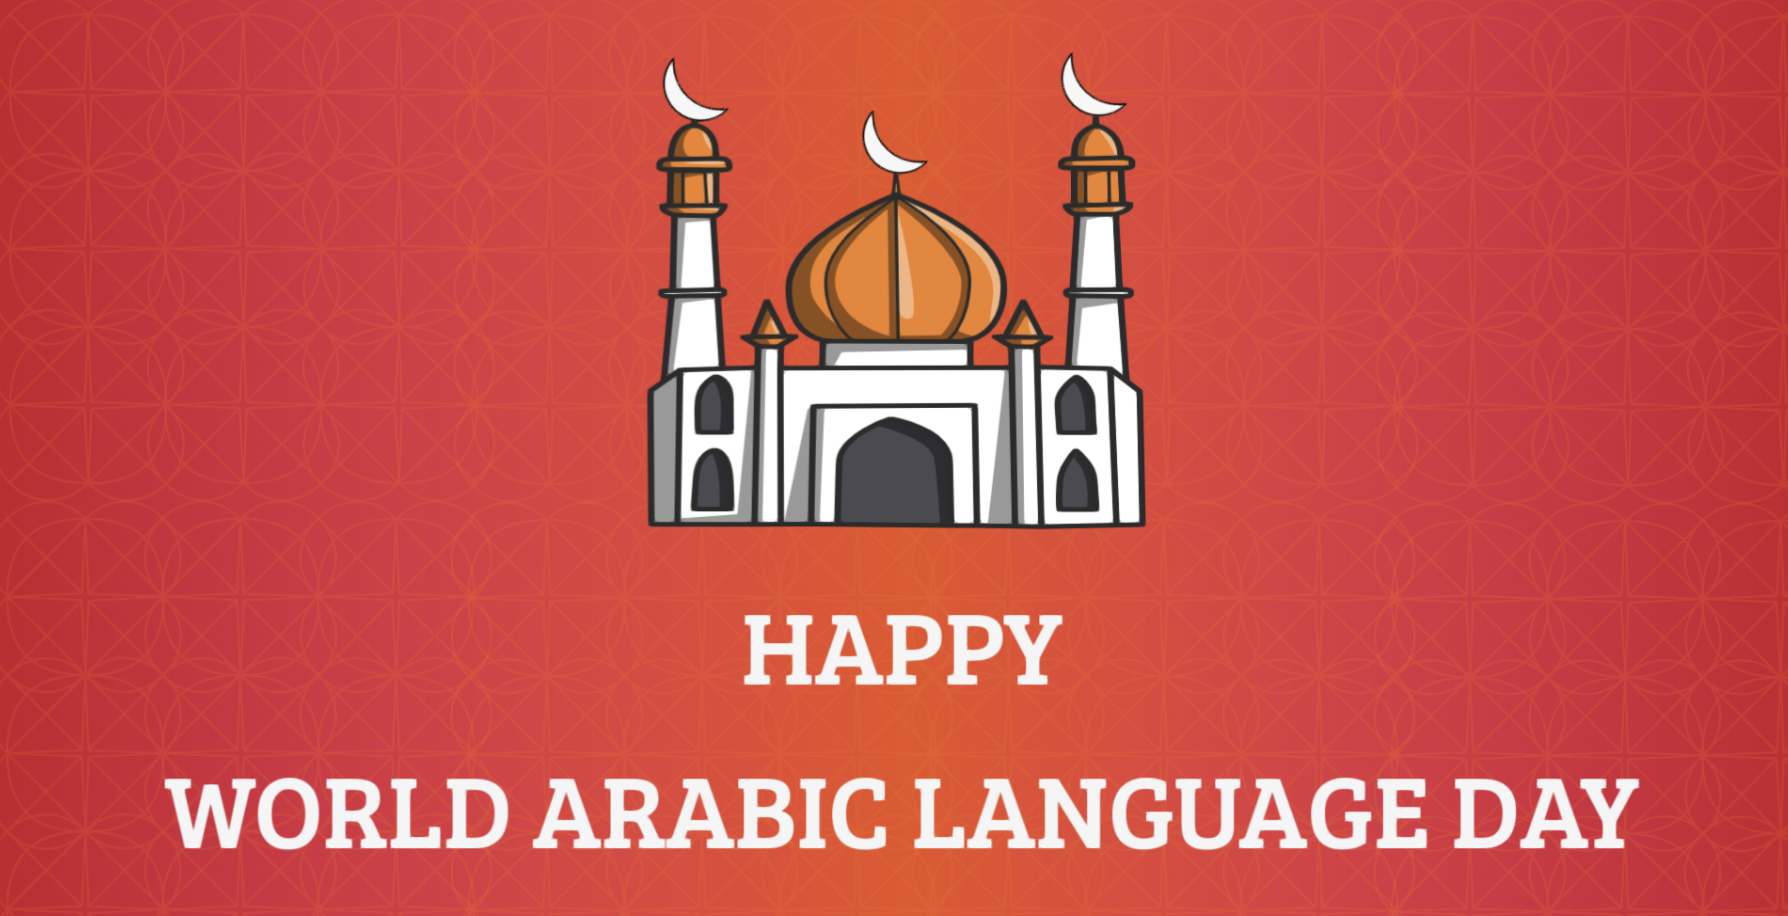 Celebrating World Arabic Language Day: templates, tools and more!